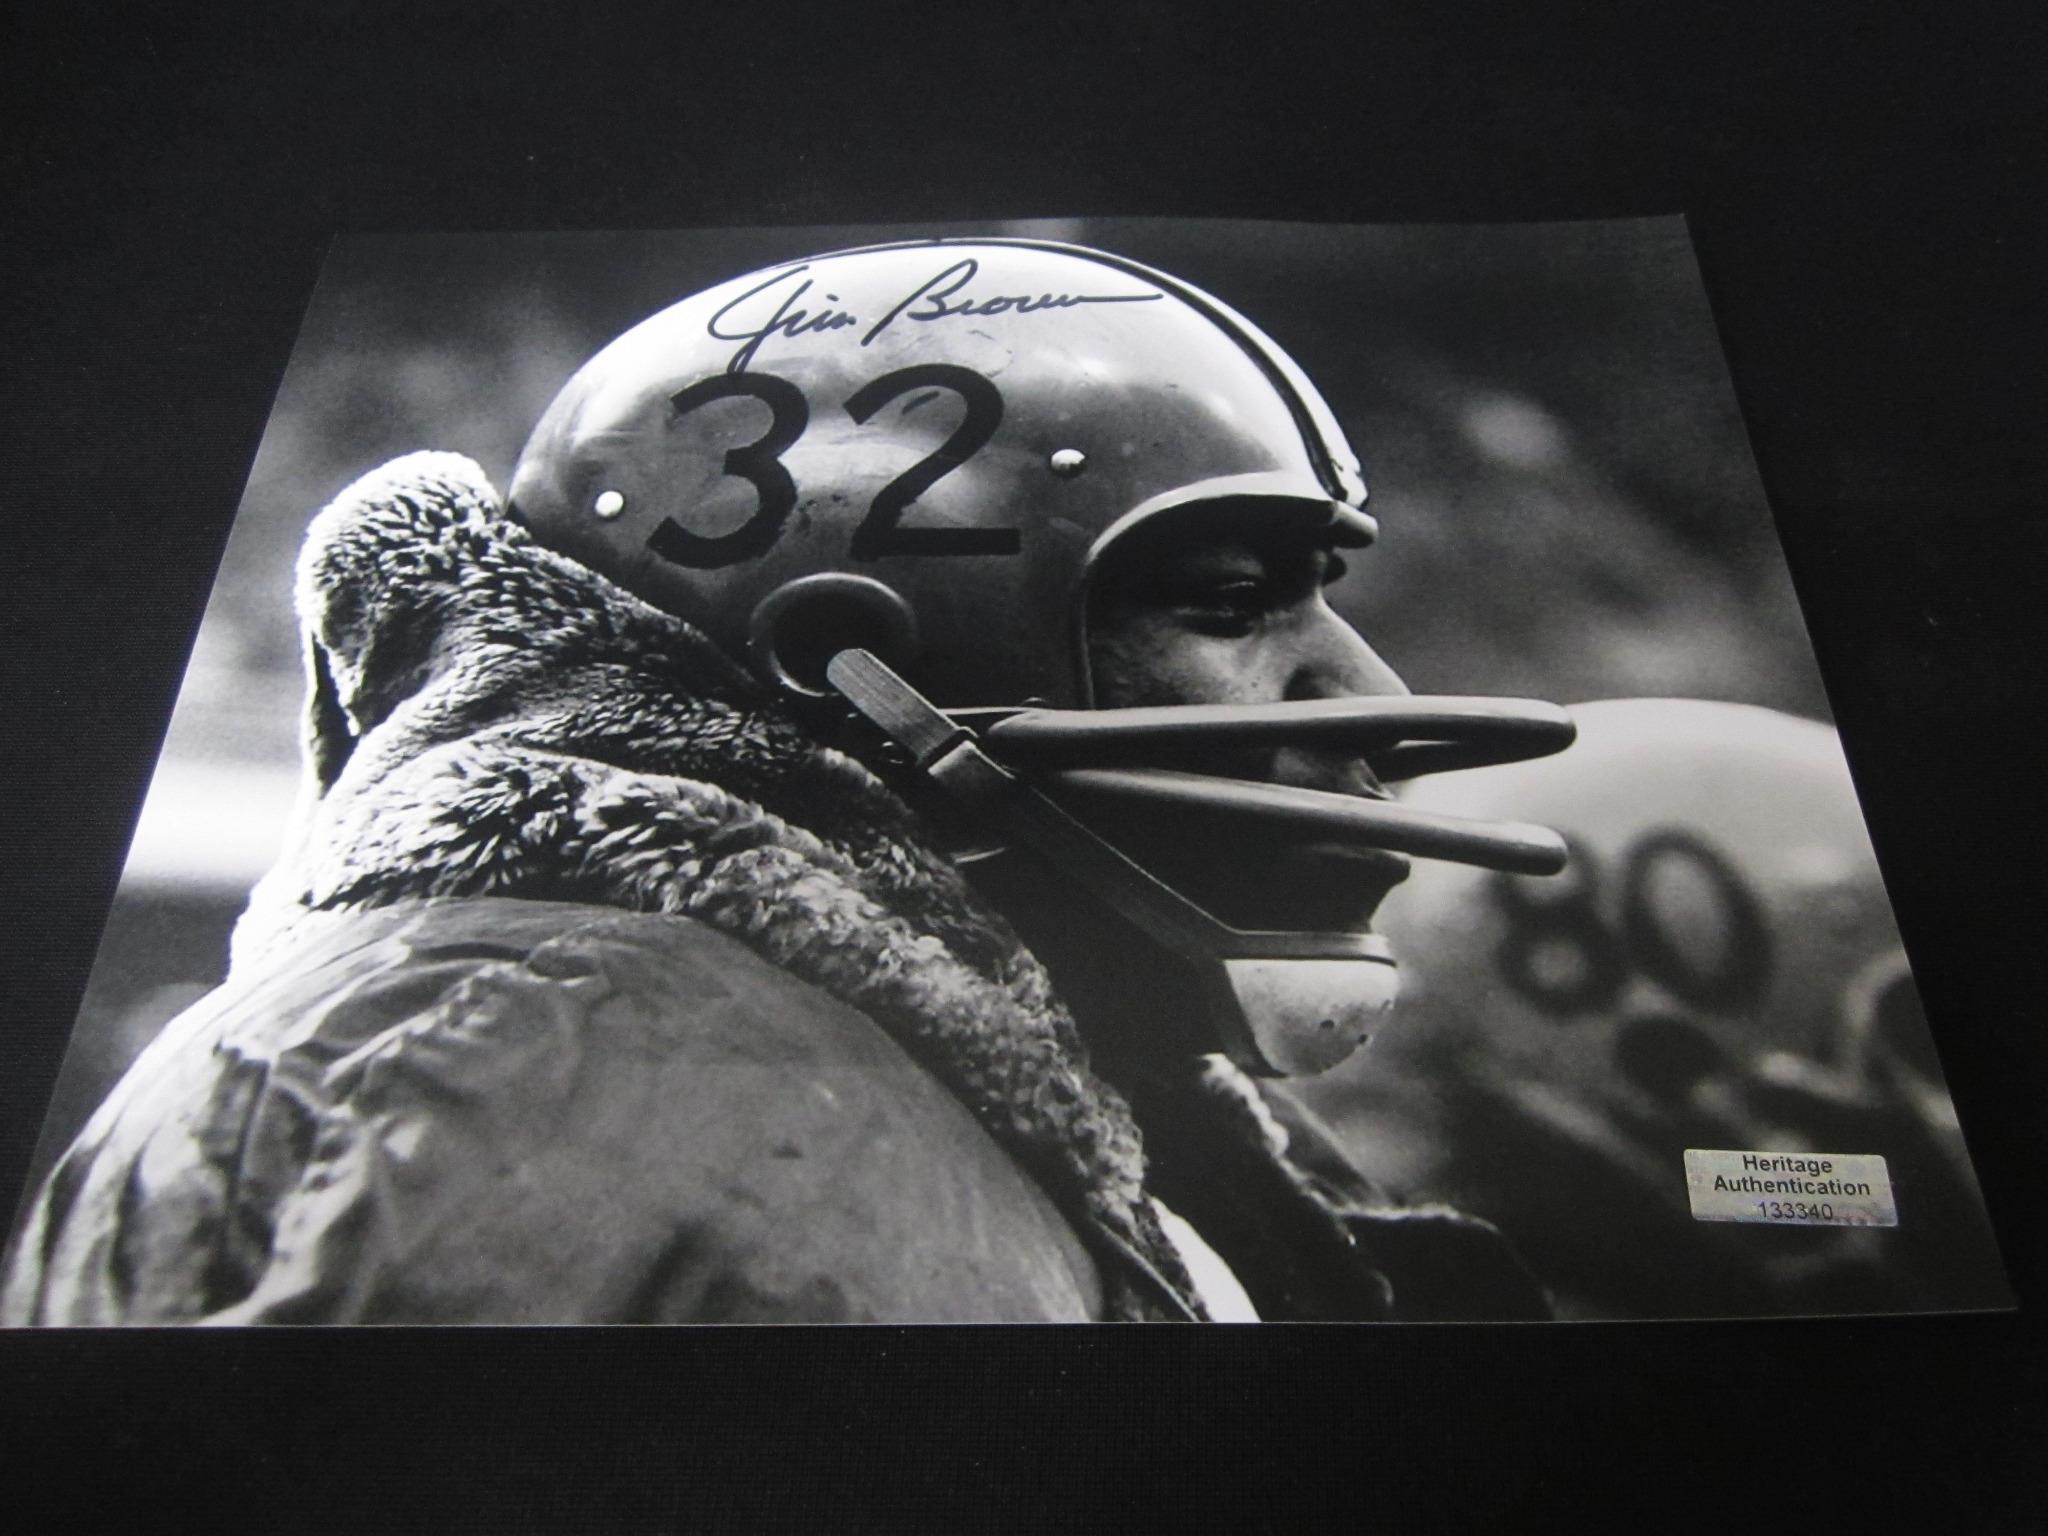 JIM BROWN SIGNED 8X10 PHOTO BROWNS COA